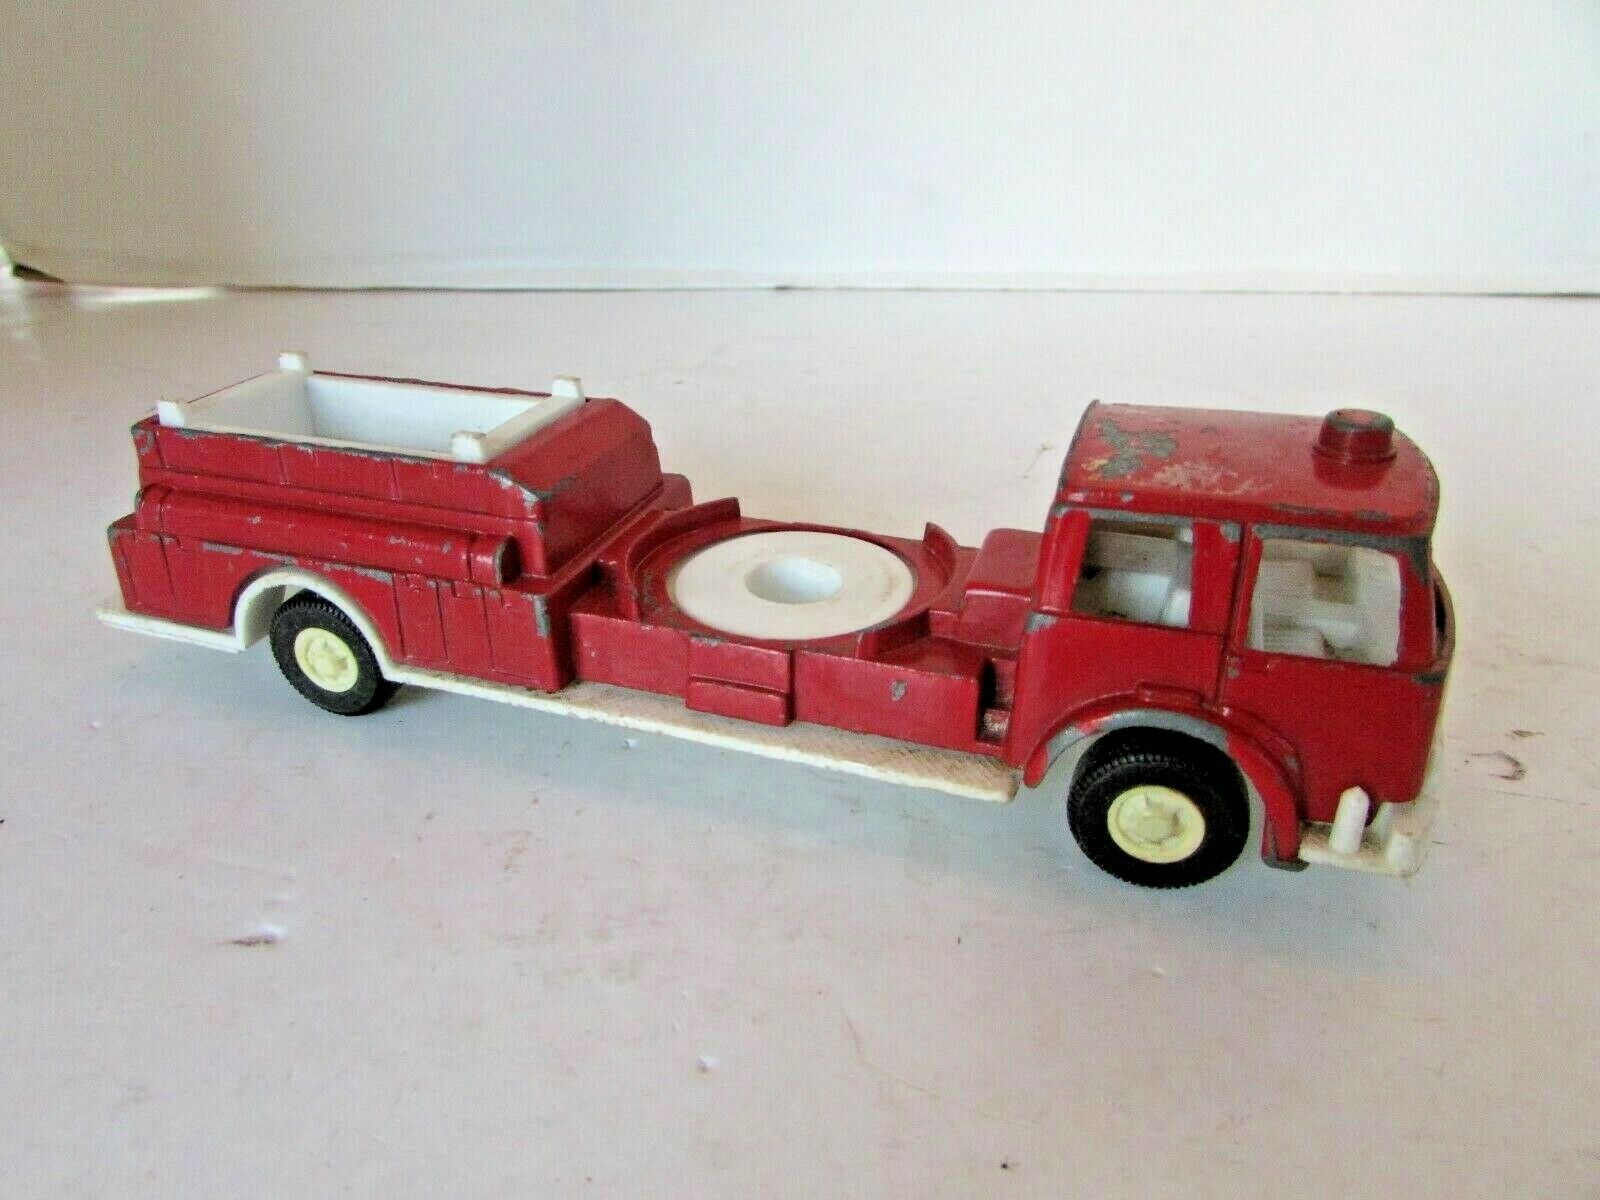 VTG 1970 TOOTSIETOY FIRE TRUCK USE FOR PARTS METAL PLASTIC RED 6.5"L H8 - $3.62